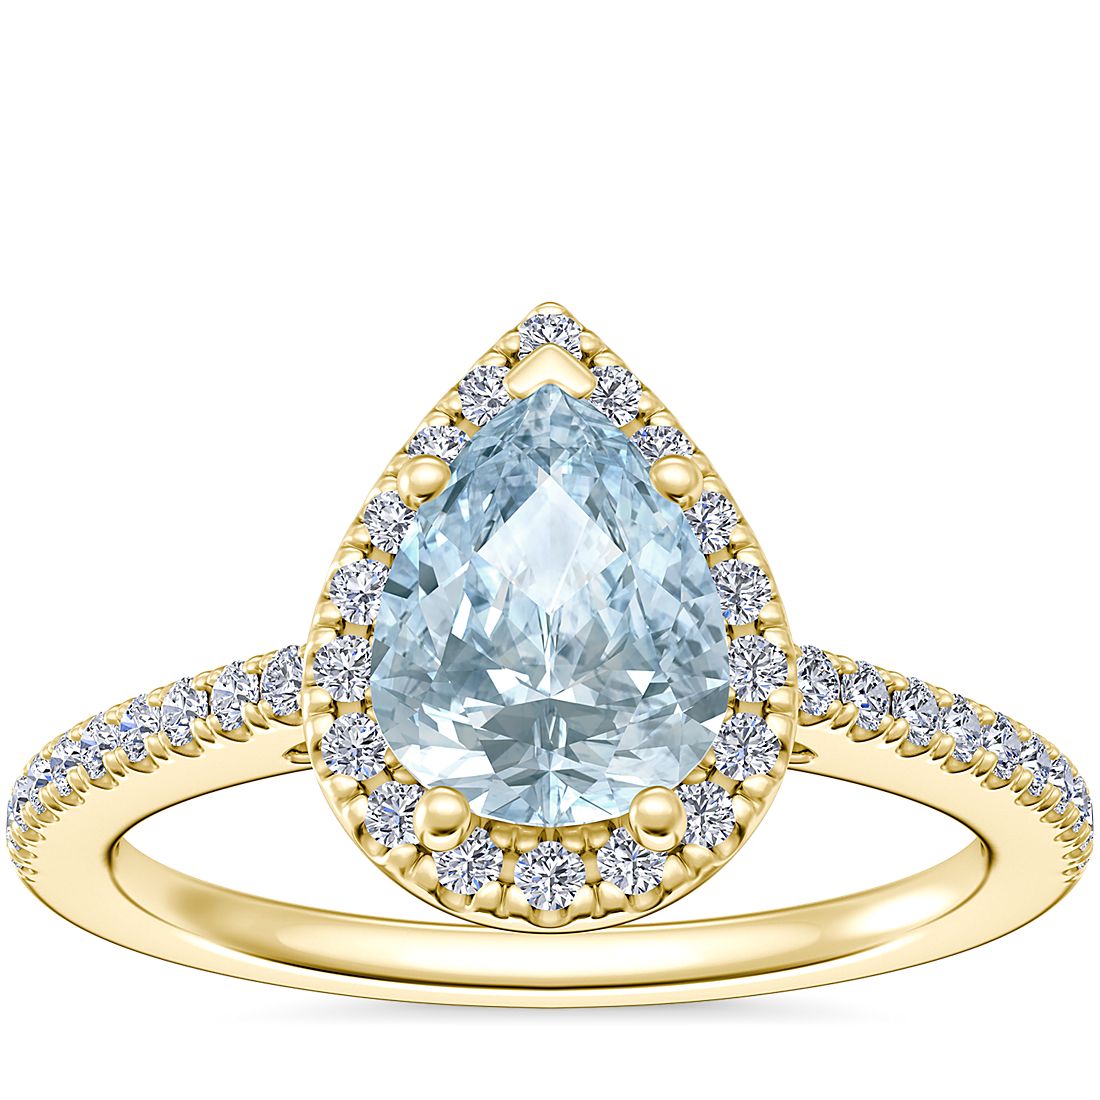 Classic Halo Diamond Engagement Ring with Pear-Shaped Aquamarine in 14k Yellow Gold (8x6mm)